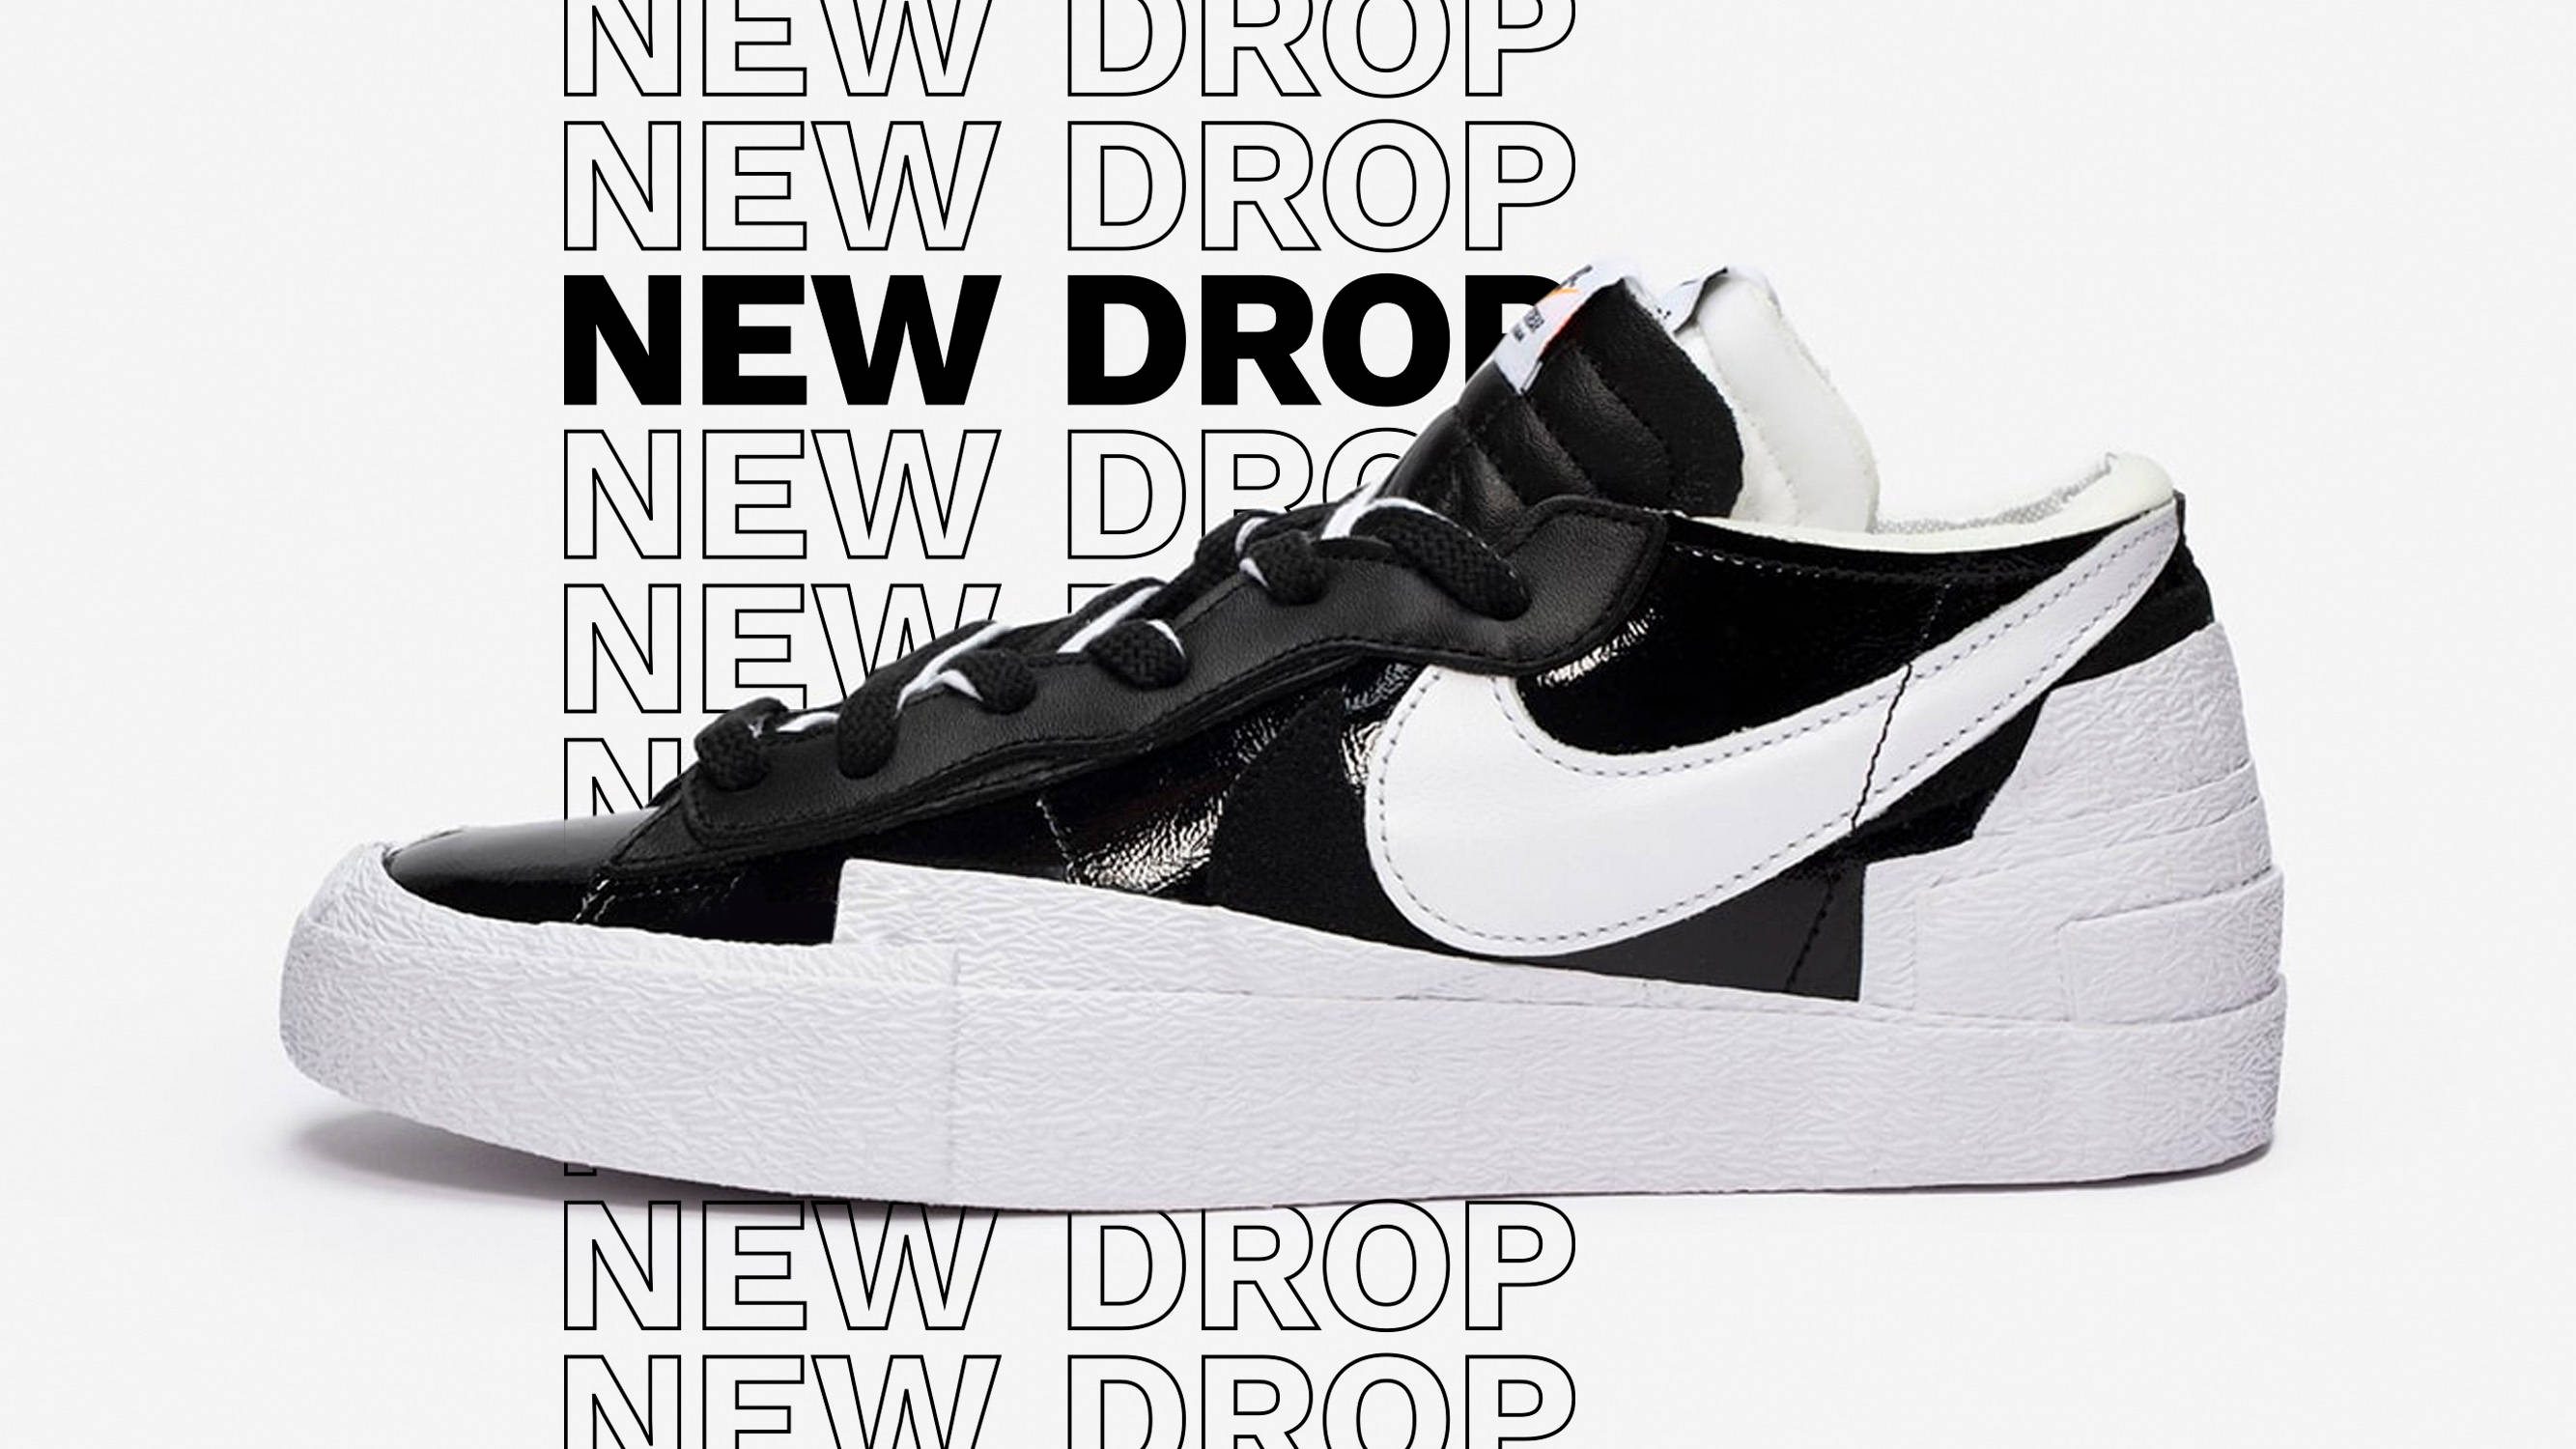 The sacai x Nike Blazer Low Surfaces With Black Patent Leather 